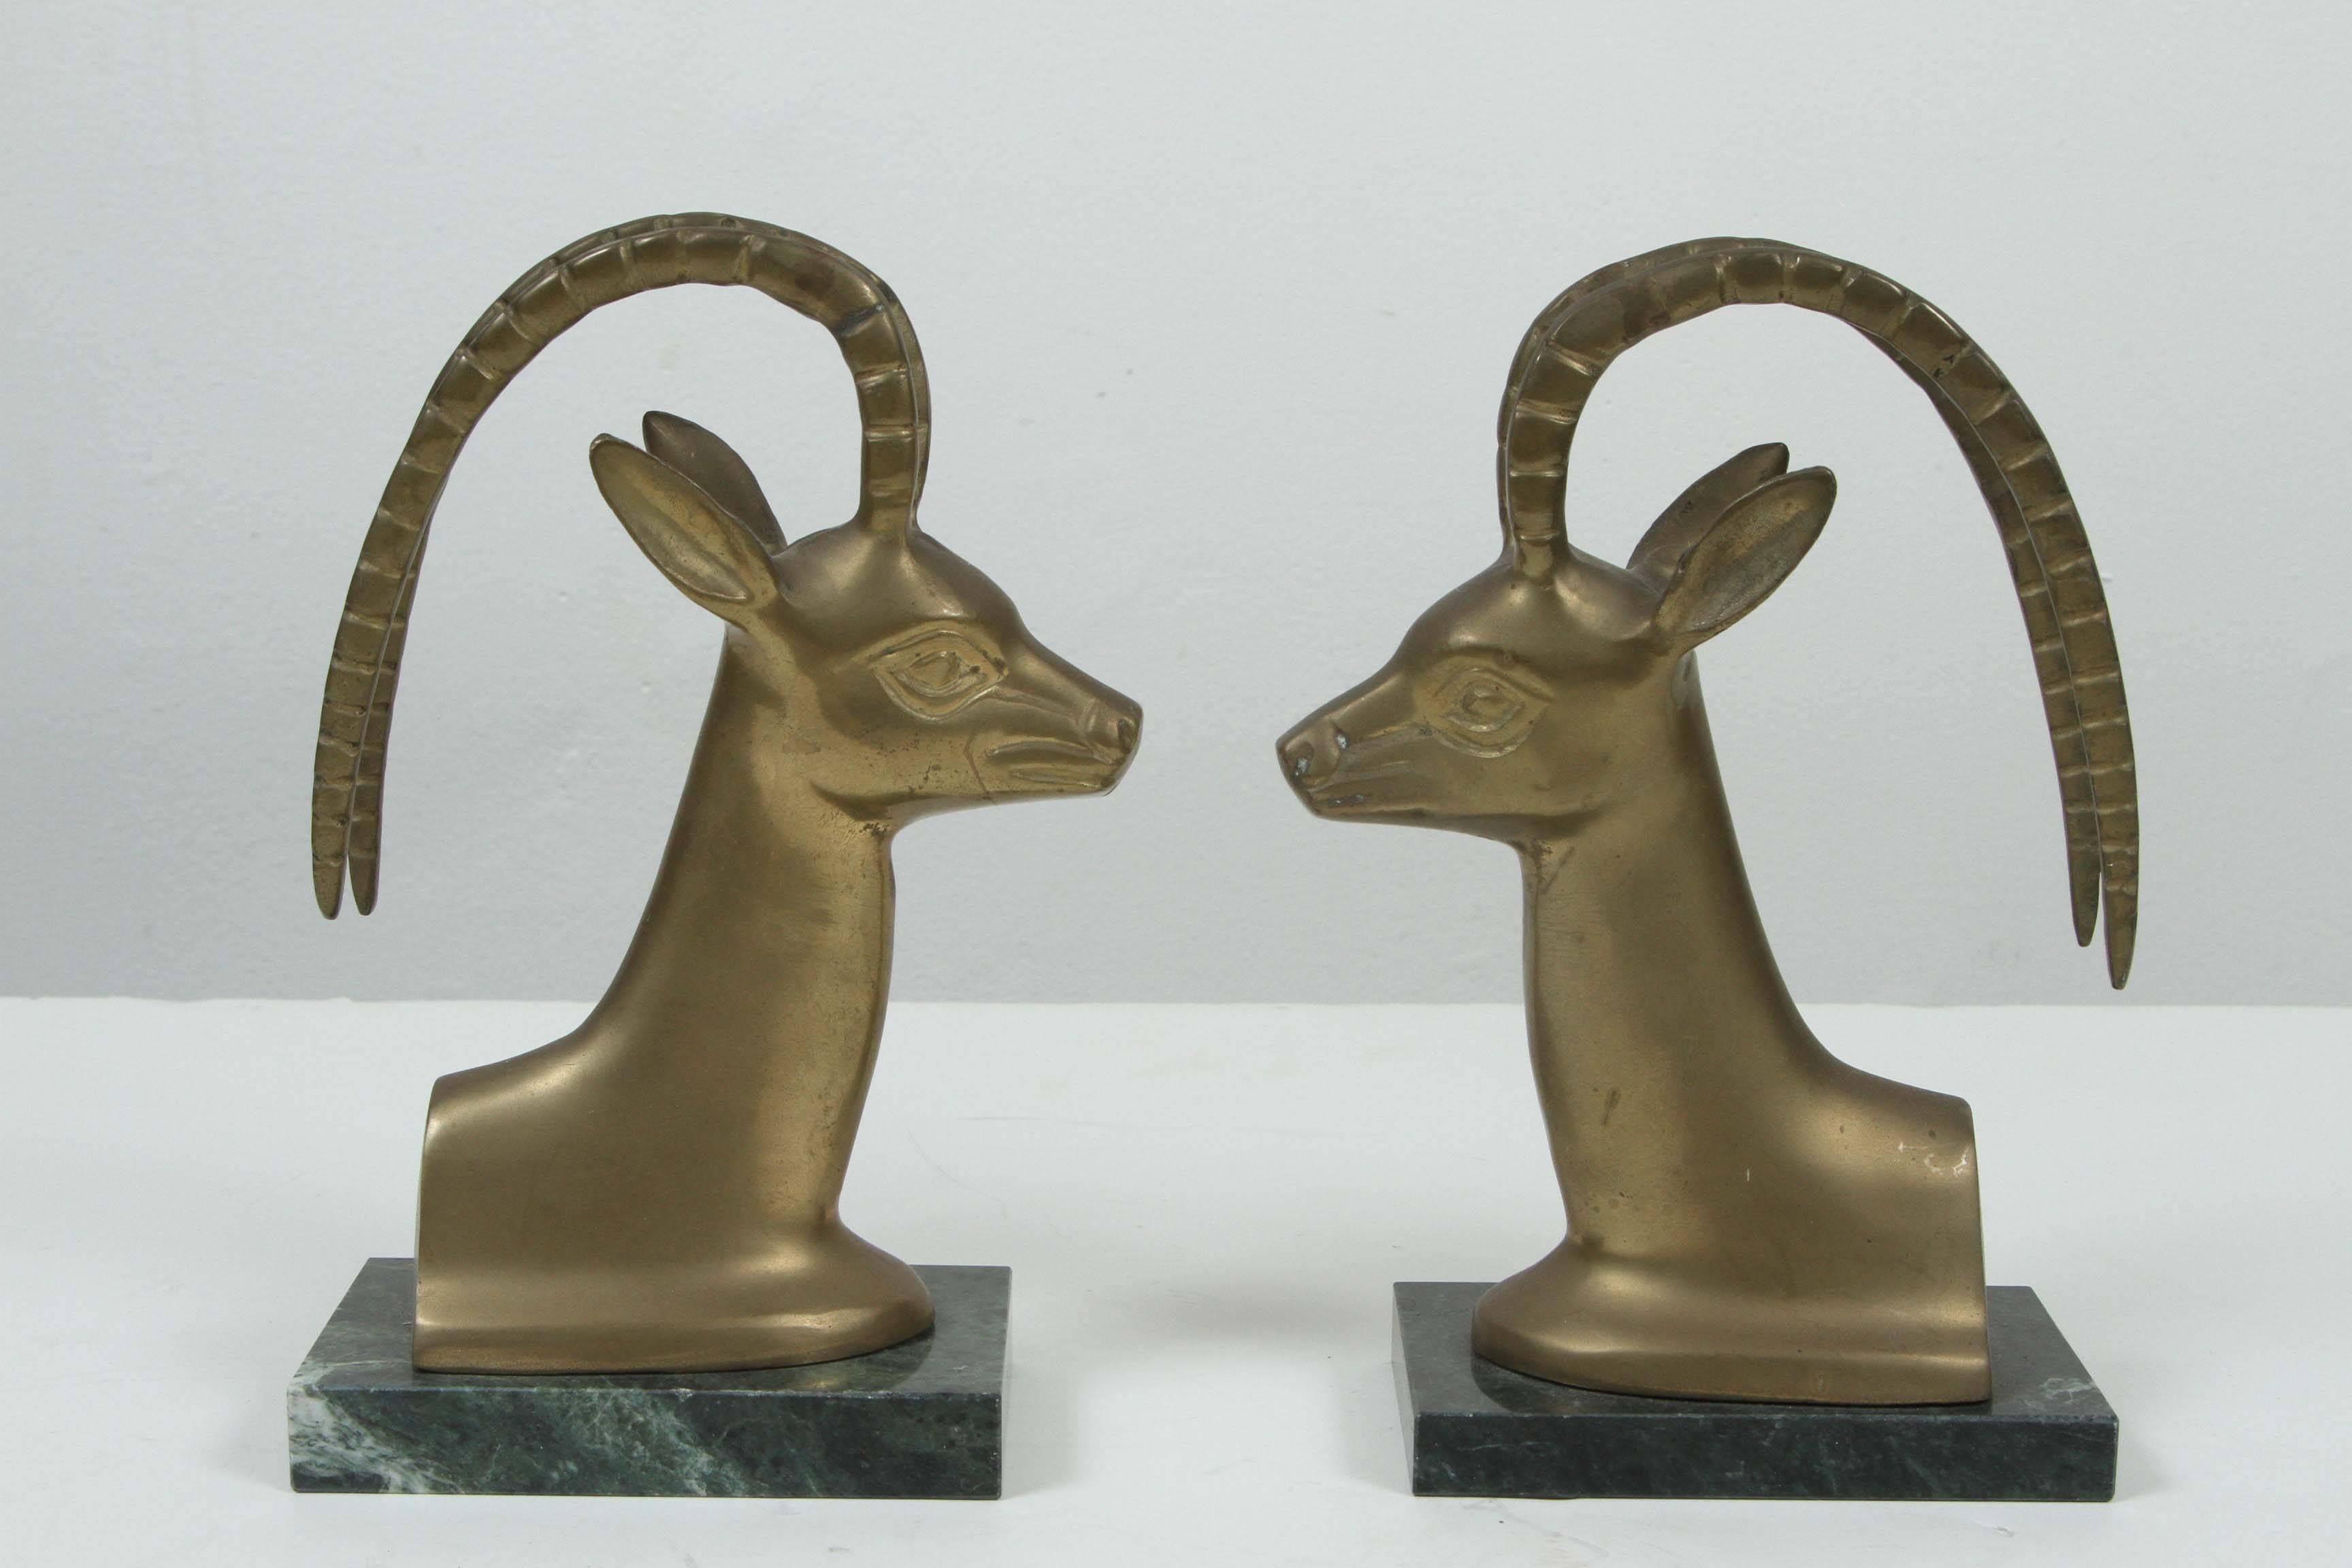 Set of vintage brass antelope on marble stand bookends.
size for each is 8